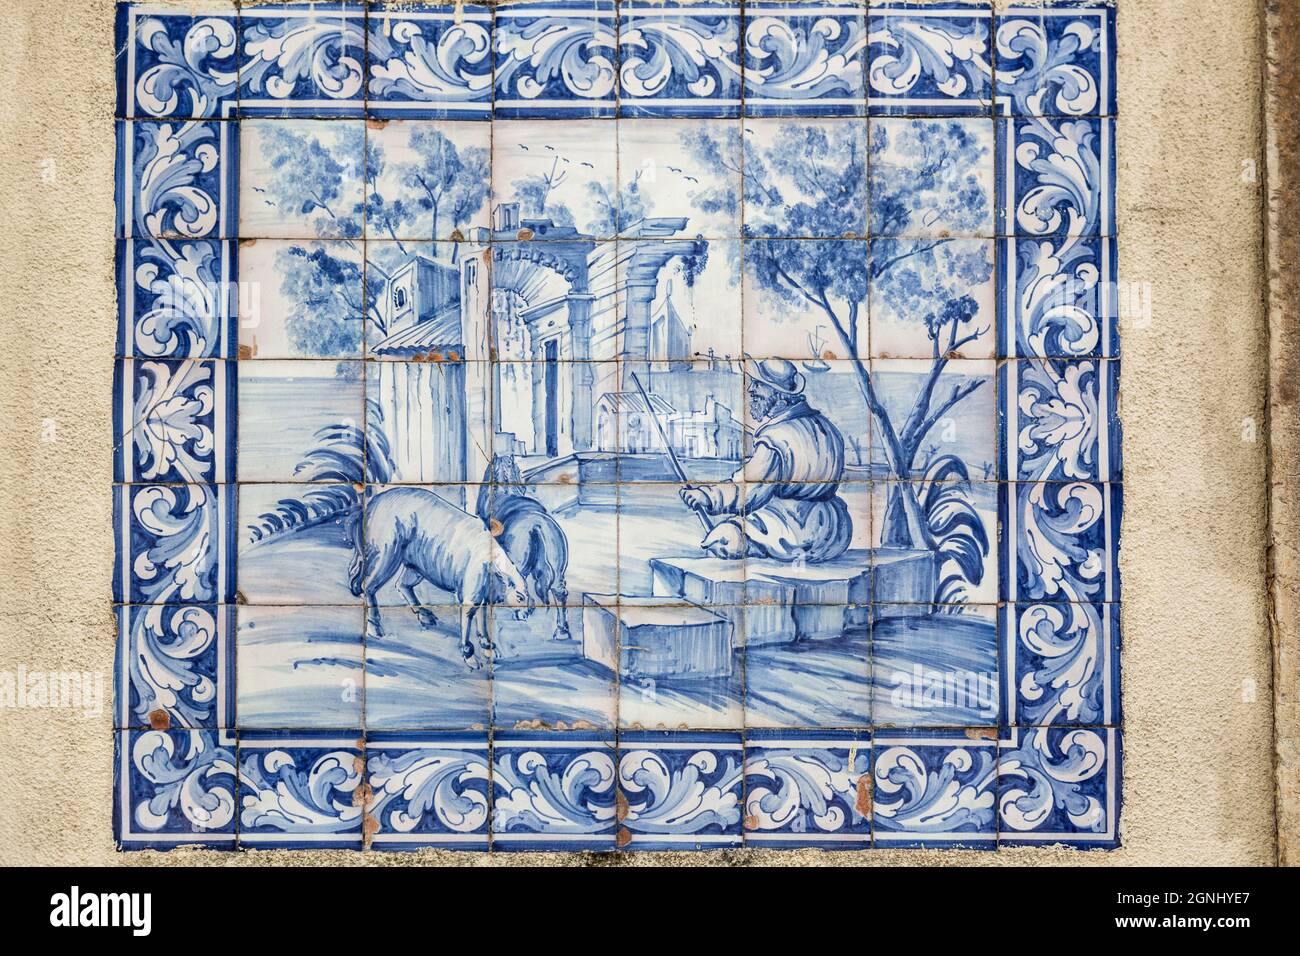 antique tiles found on wall in europe Stock Photo